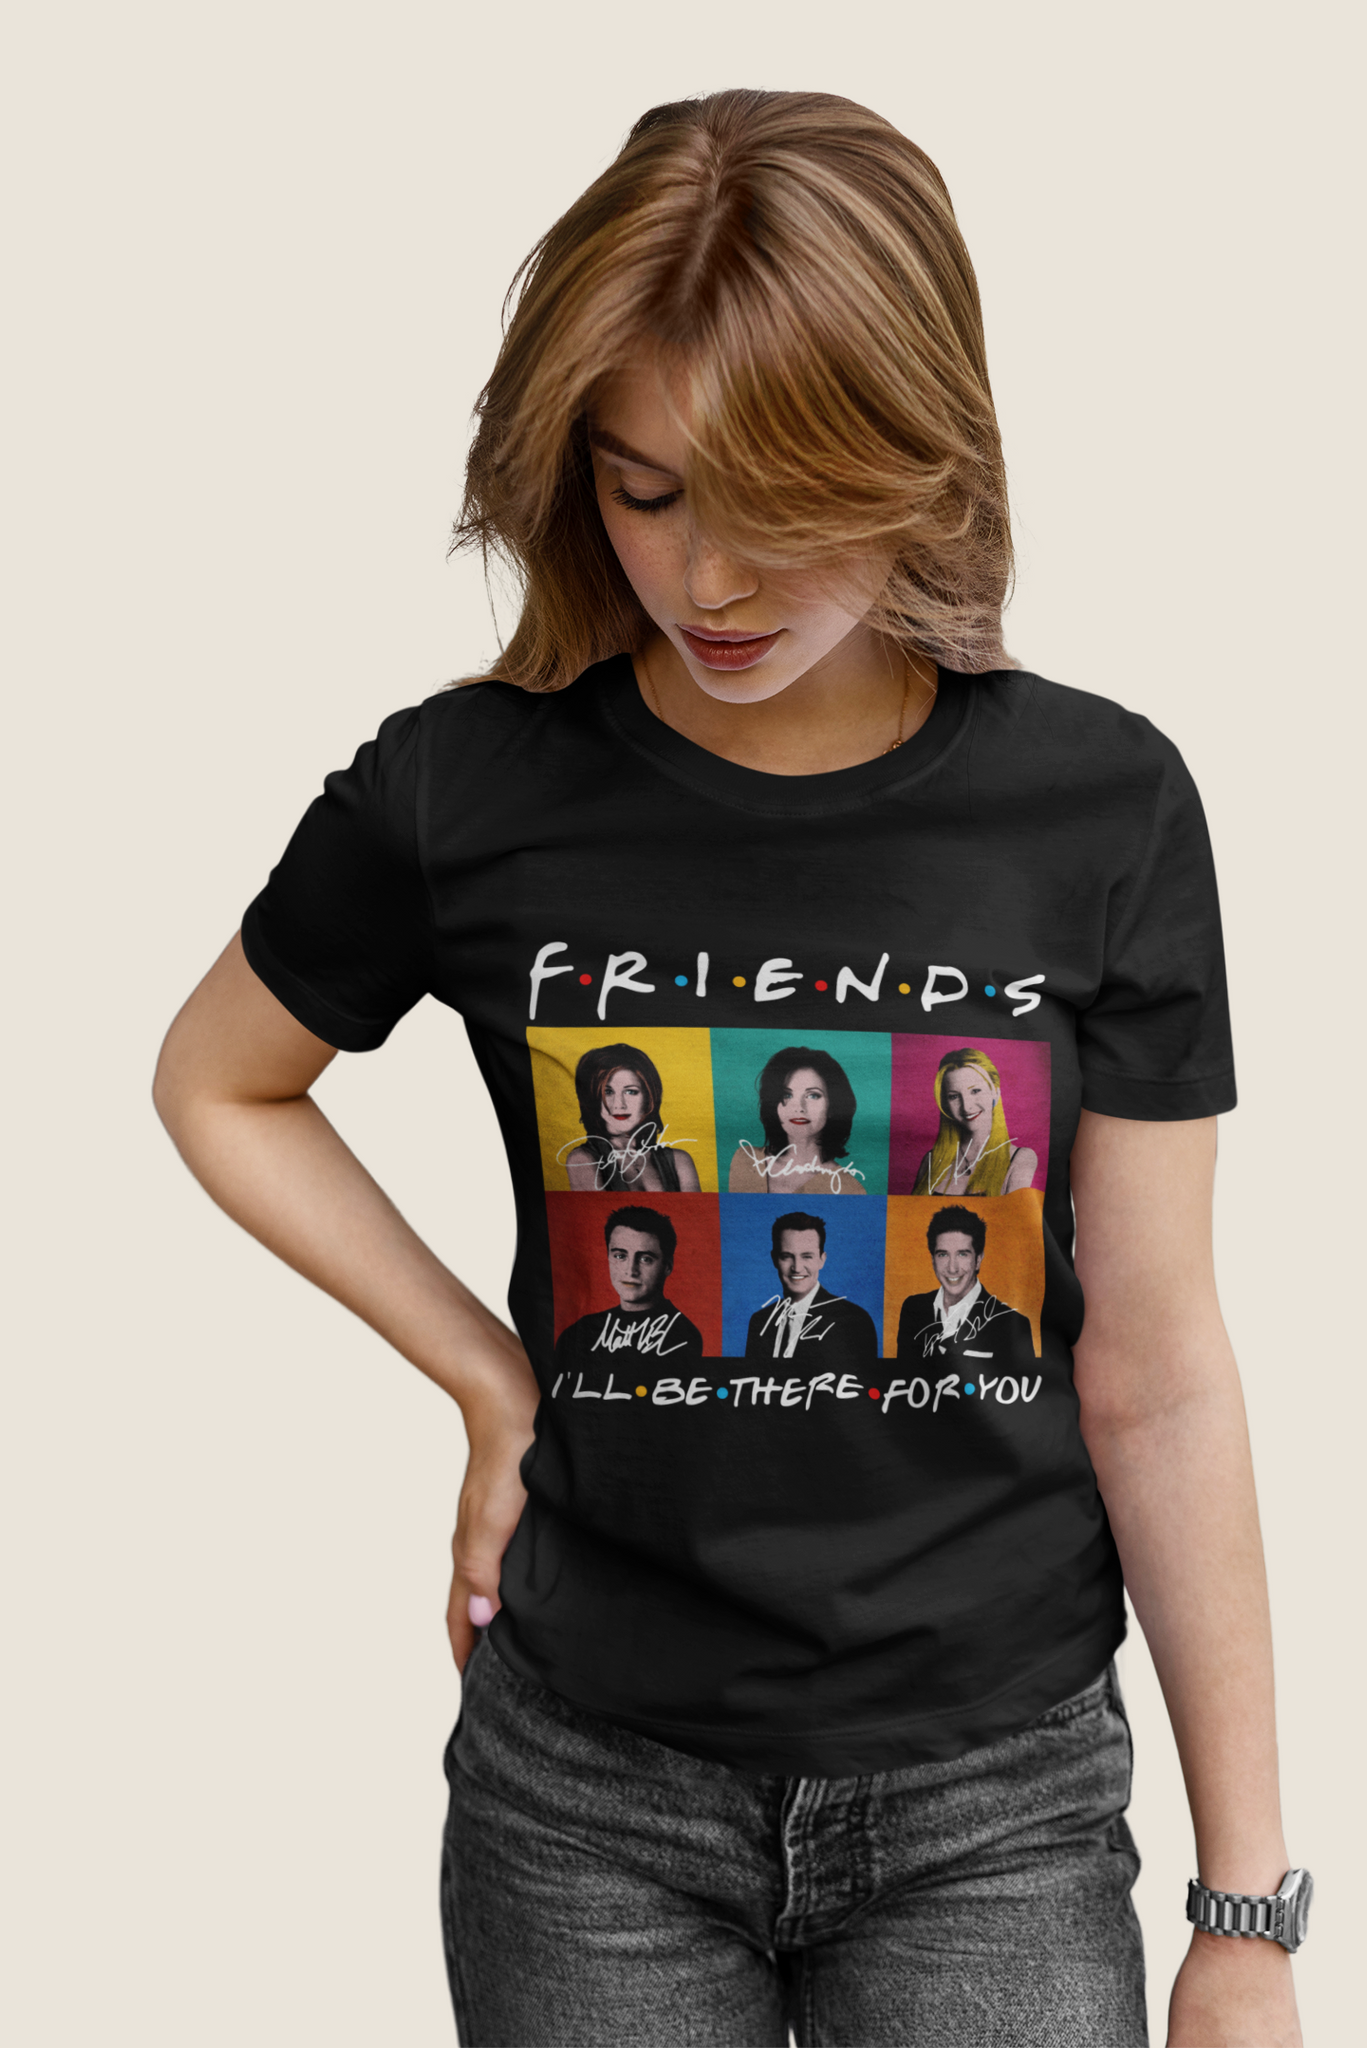 Friends TV Show T Shirt, Friends Shirt, Friends Characters T Shirt, Ill Be There For You Tshirt